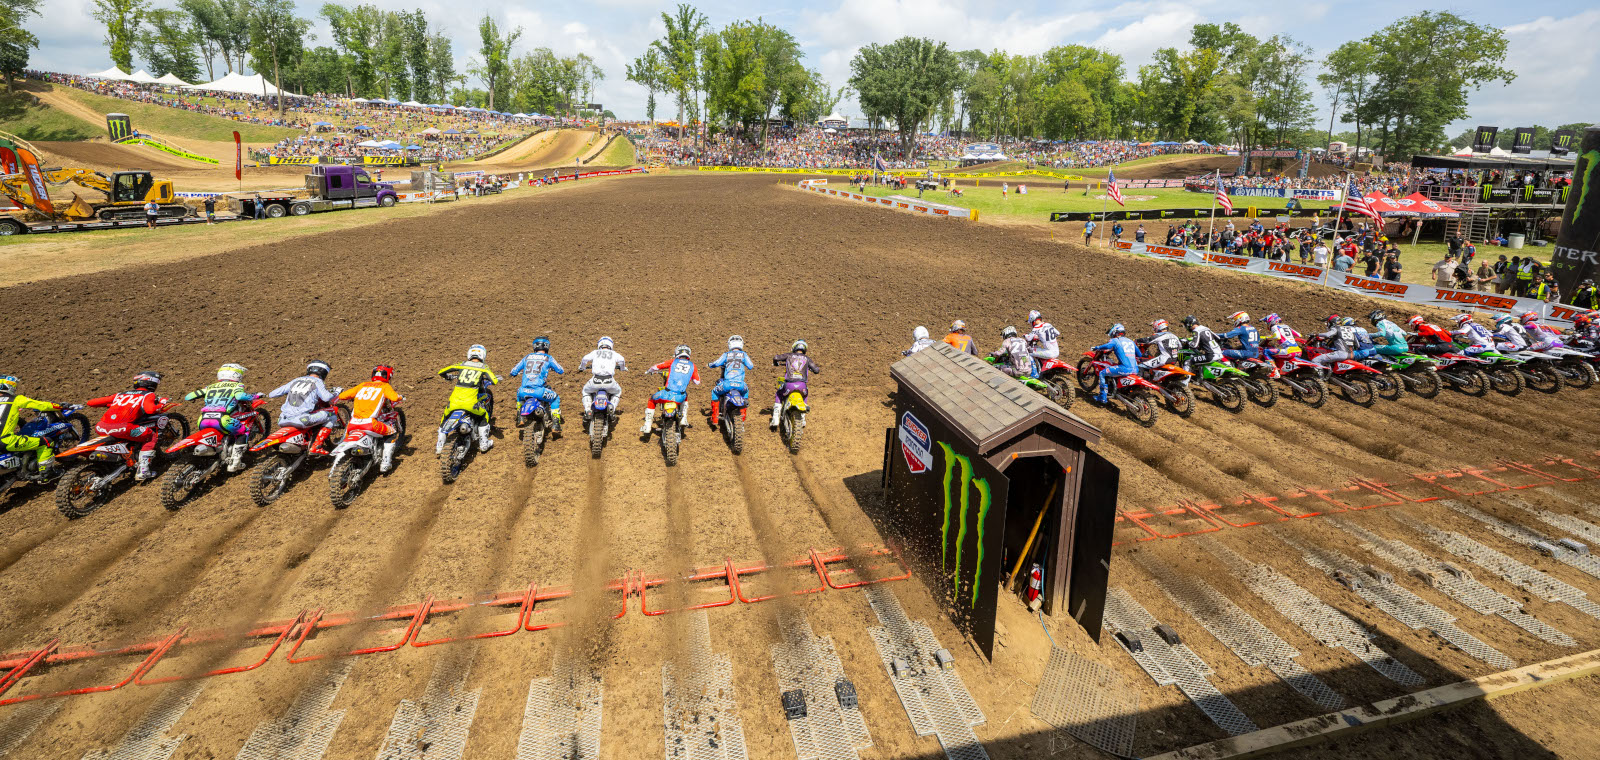 SuperMotocross Finalizes Field of 60 Racers for Concord, NC